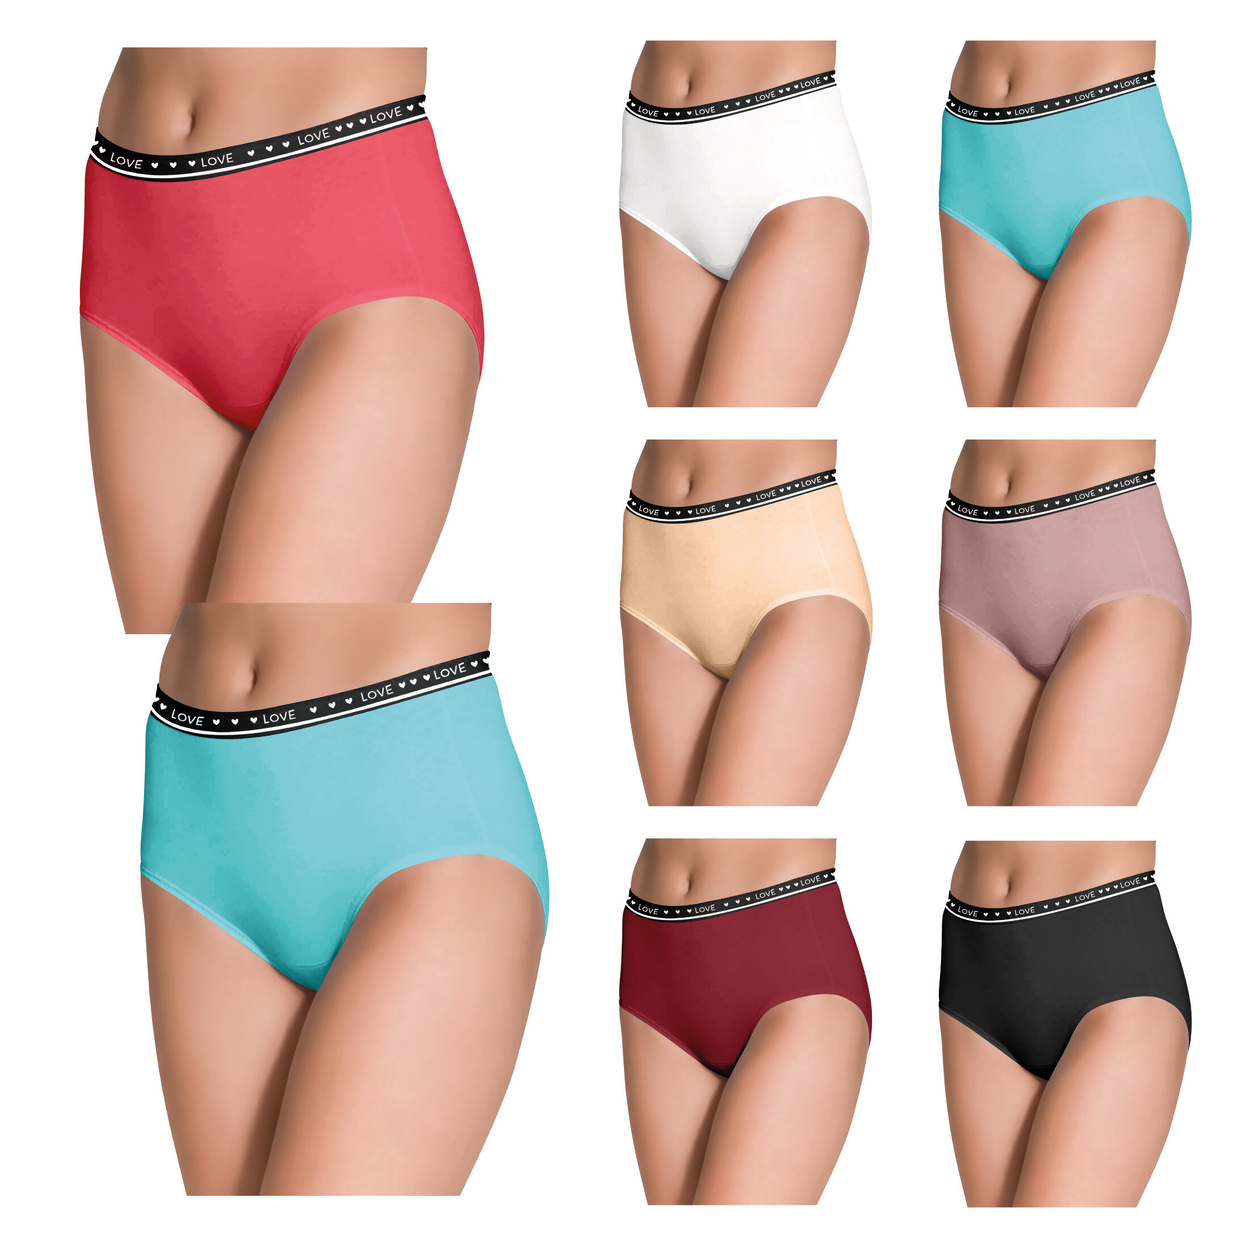 5-Pack: Women's Ultra Soft Moisture Wicking Panties Cotton Perfect Fit Underwear (Plus Sizes Available) - X-large